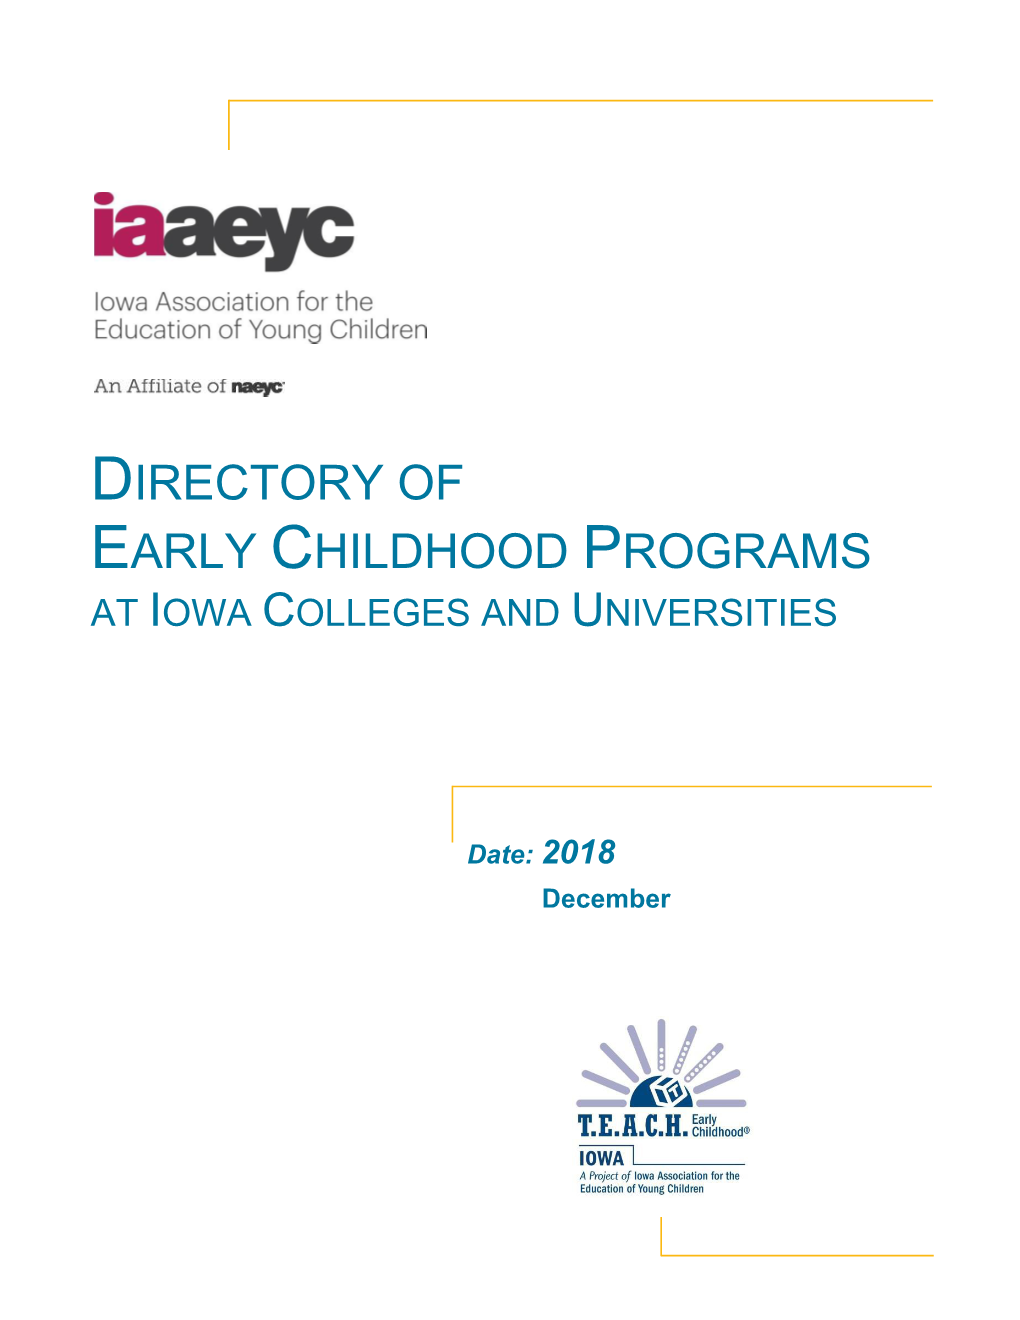 Directory of Early Childhood Programs at Iowa Colleges and Universities